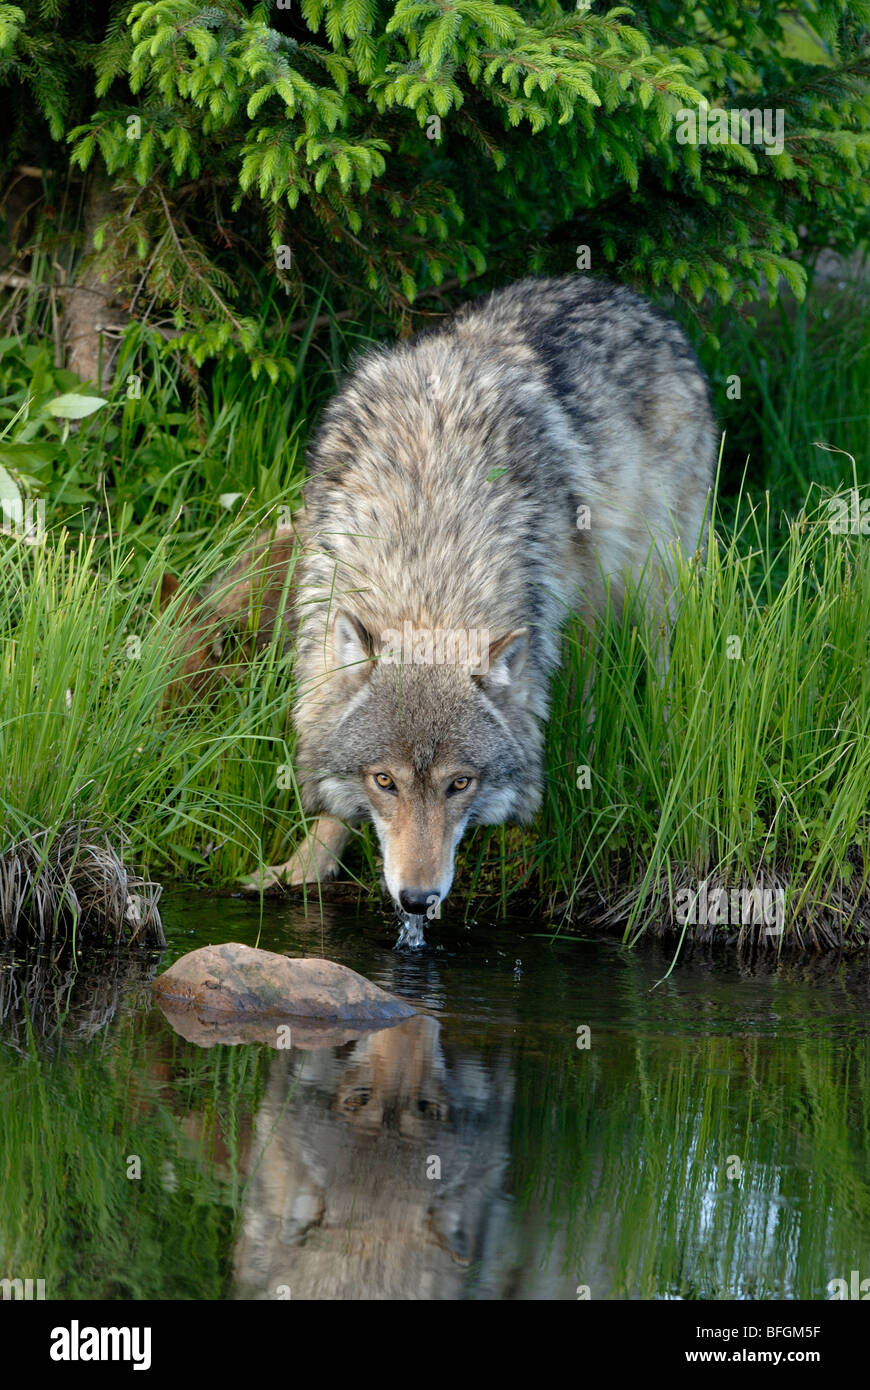 Timber or Gray wolf (Canis lupus), drinking from pond during summer. Minnesota, USA Stock Photo